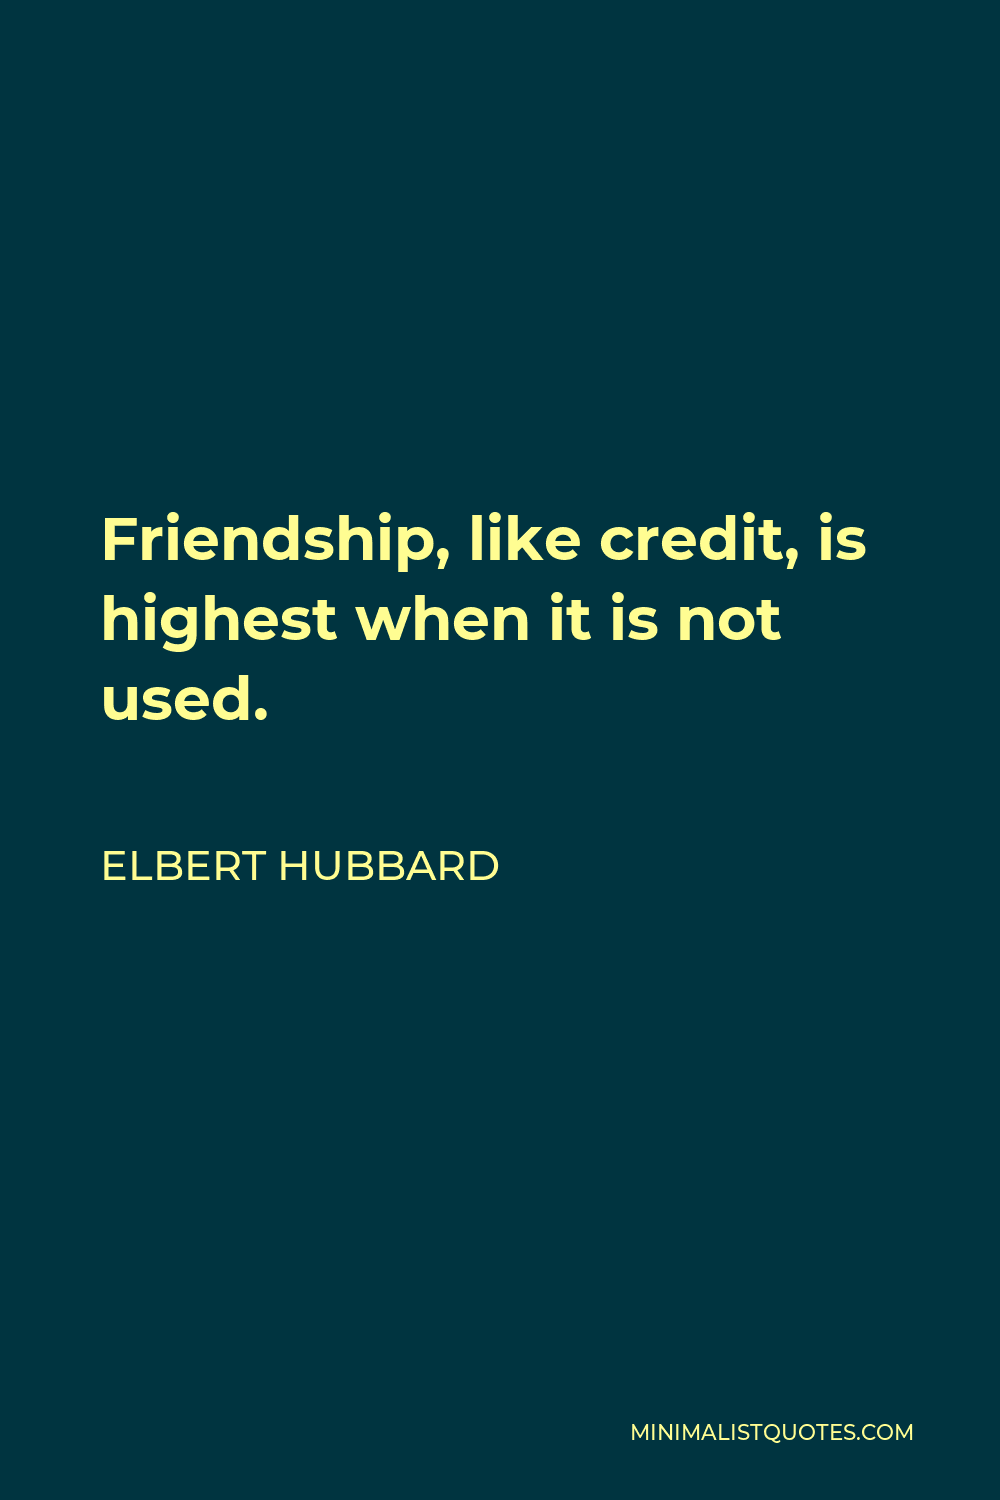 Elbert Hubbard Quote - Friendship, like credit, is highest when it is not used.